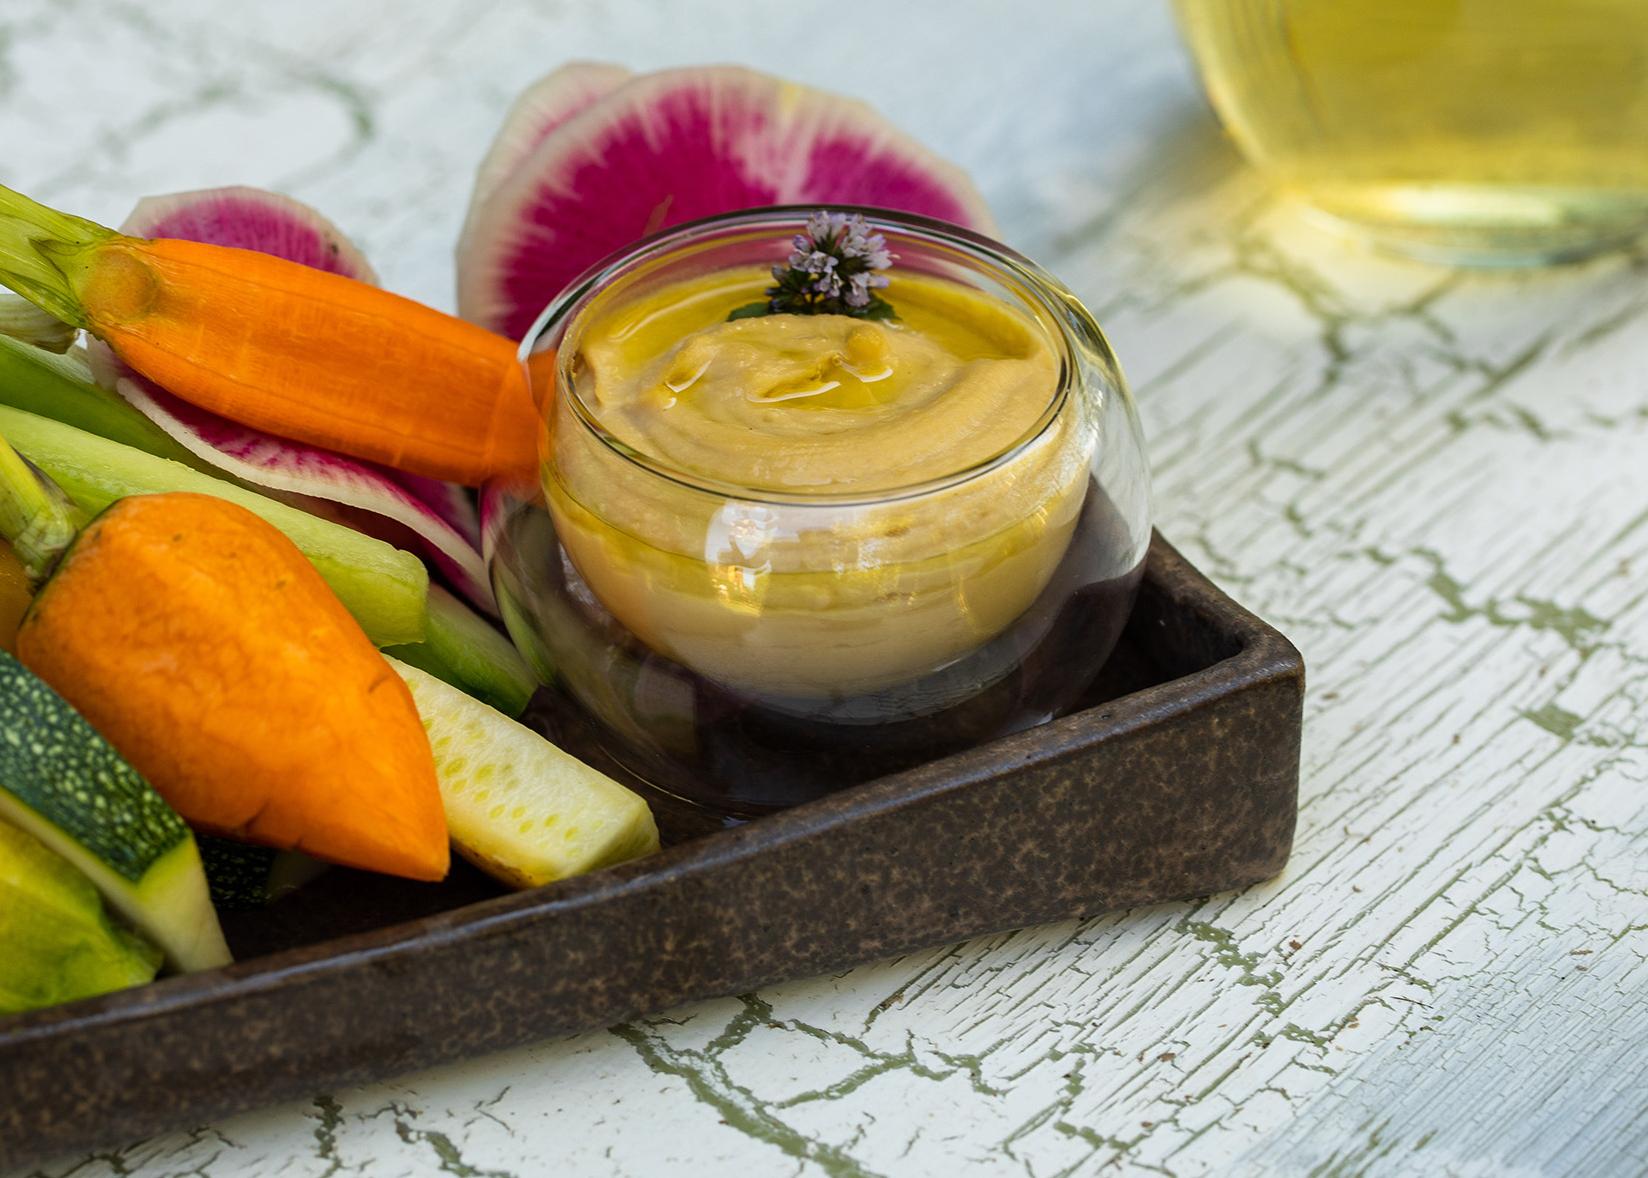  This hummus recipe will transport your taste buds straight to the Middle East.